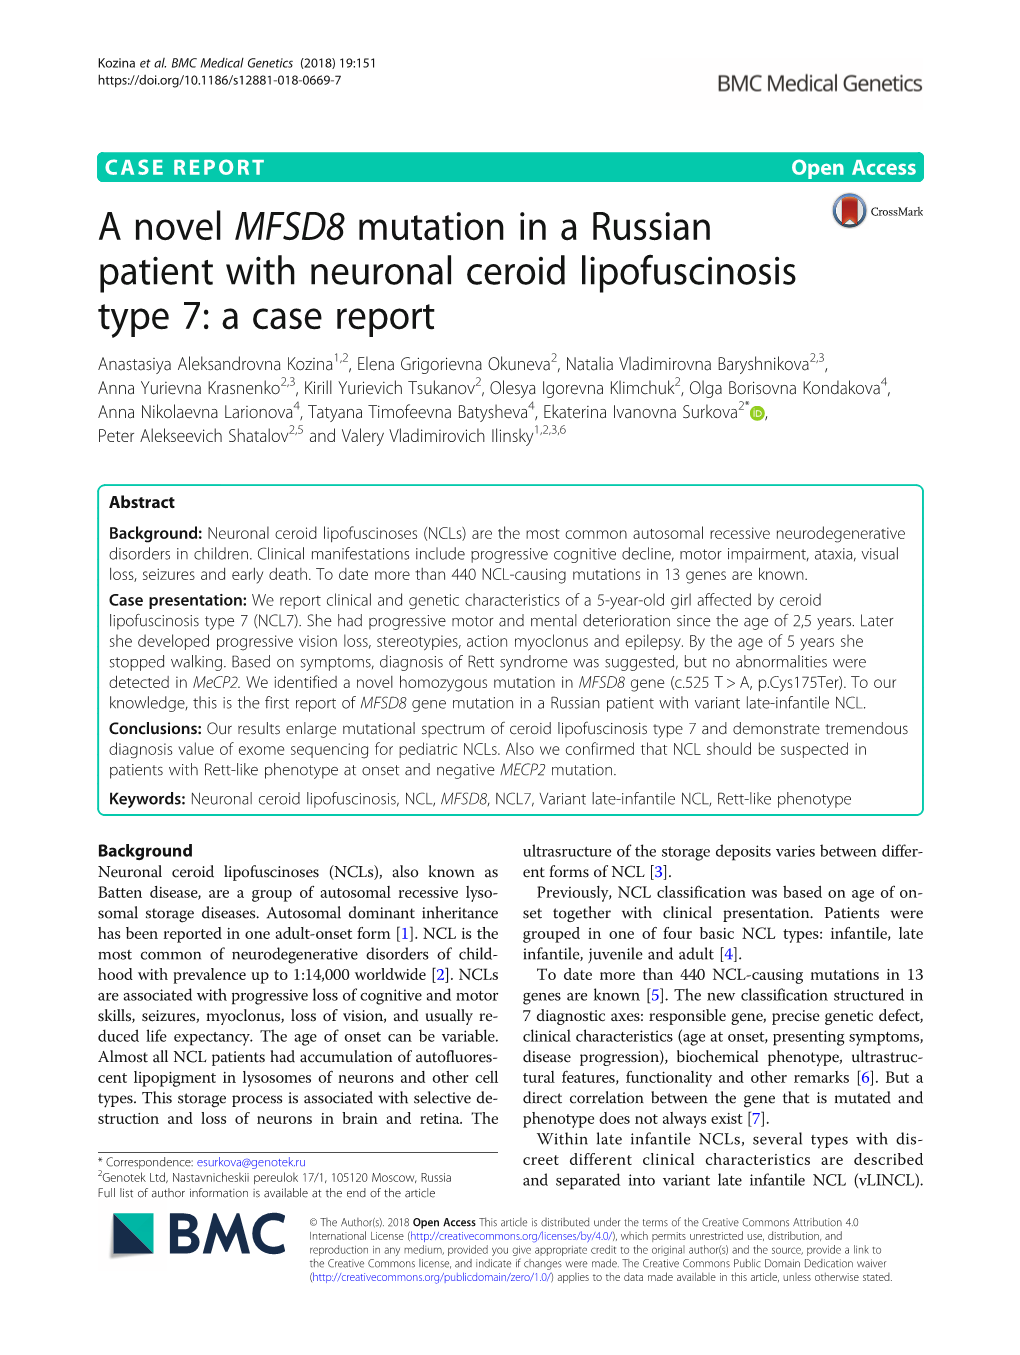 A Novel MFSD8 Mutation in a Russian Patient with Neuronal Ceroid